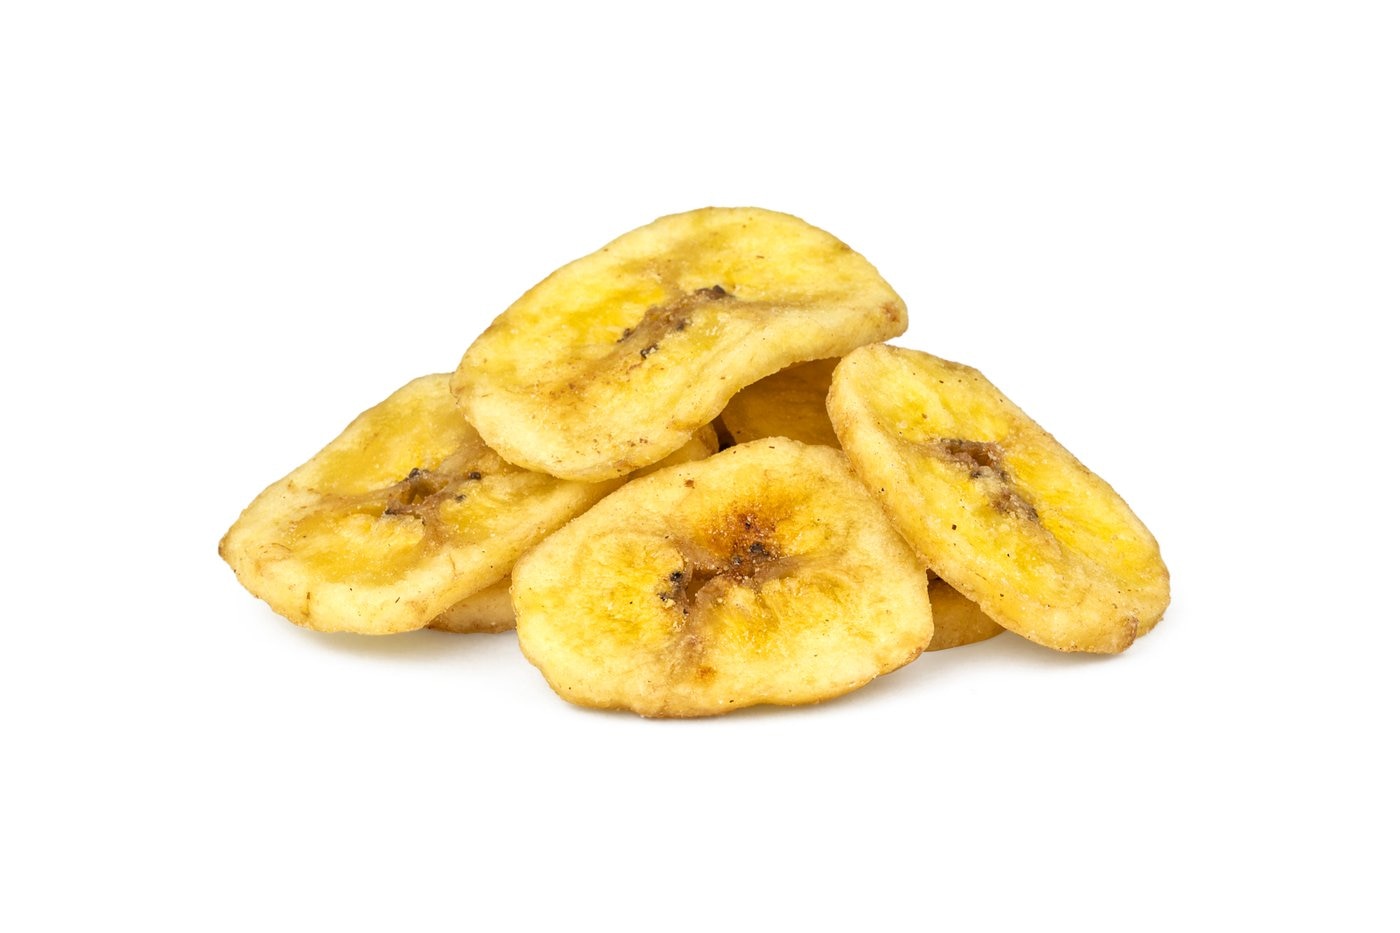 How to Dehydrate Banana Chips with Cinnamon and Sugar